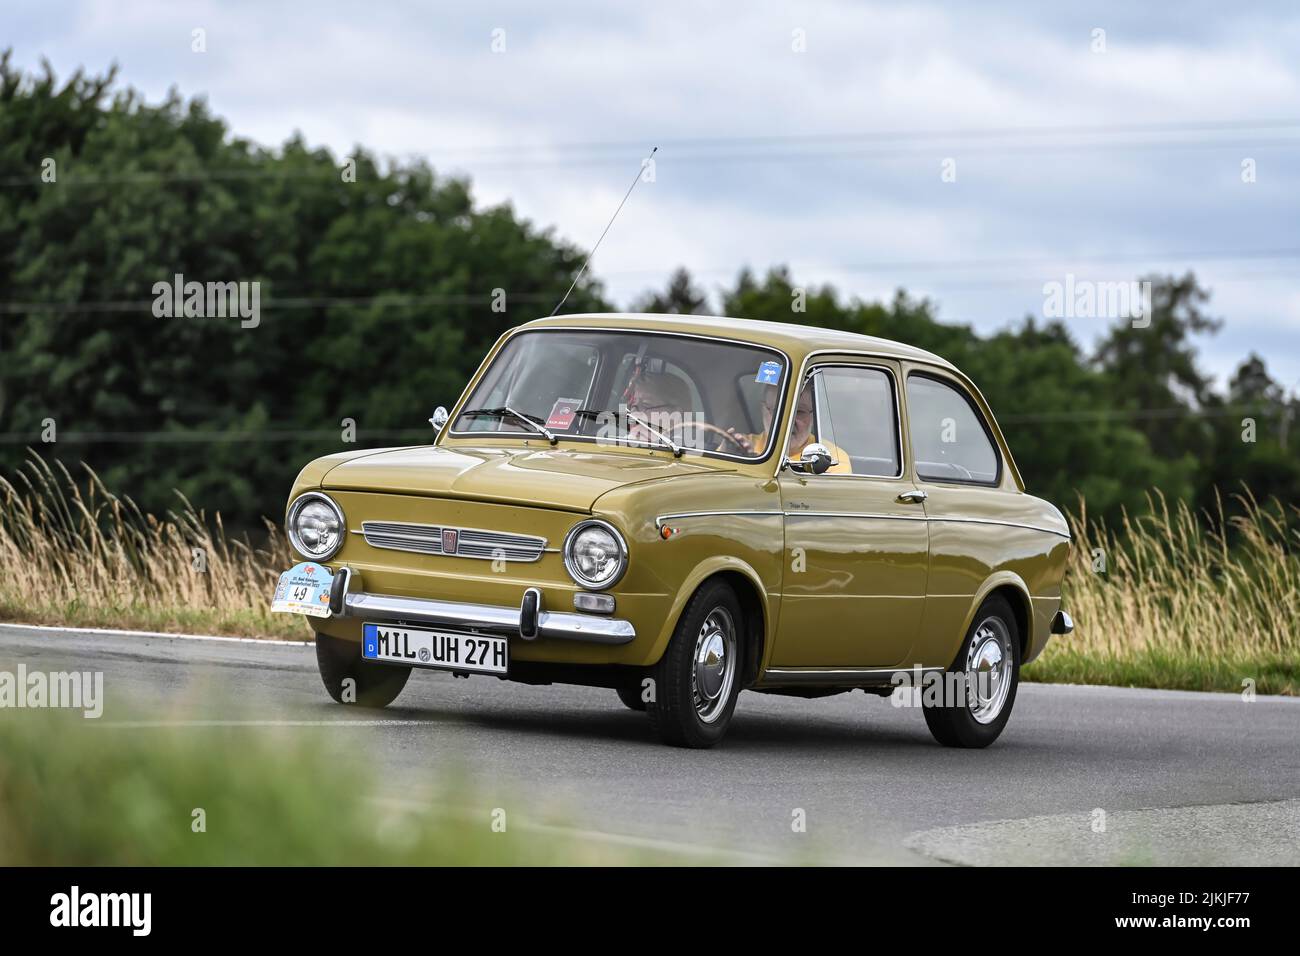 Bad König, Hesse, Germany, Fiat 850 Special, year 1969, 843 cc displacement, 27 KW at the classic car festival. Stock Photo